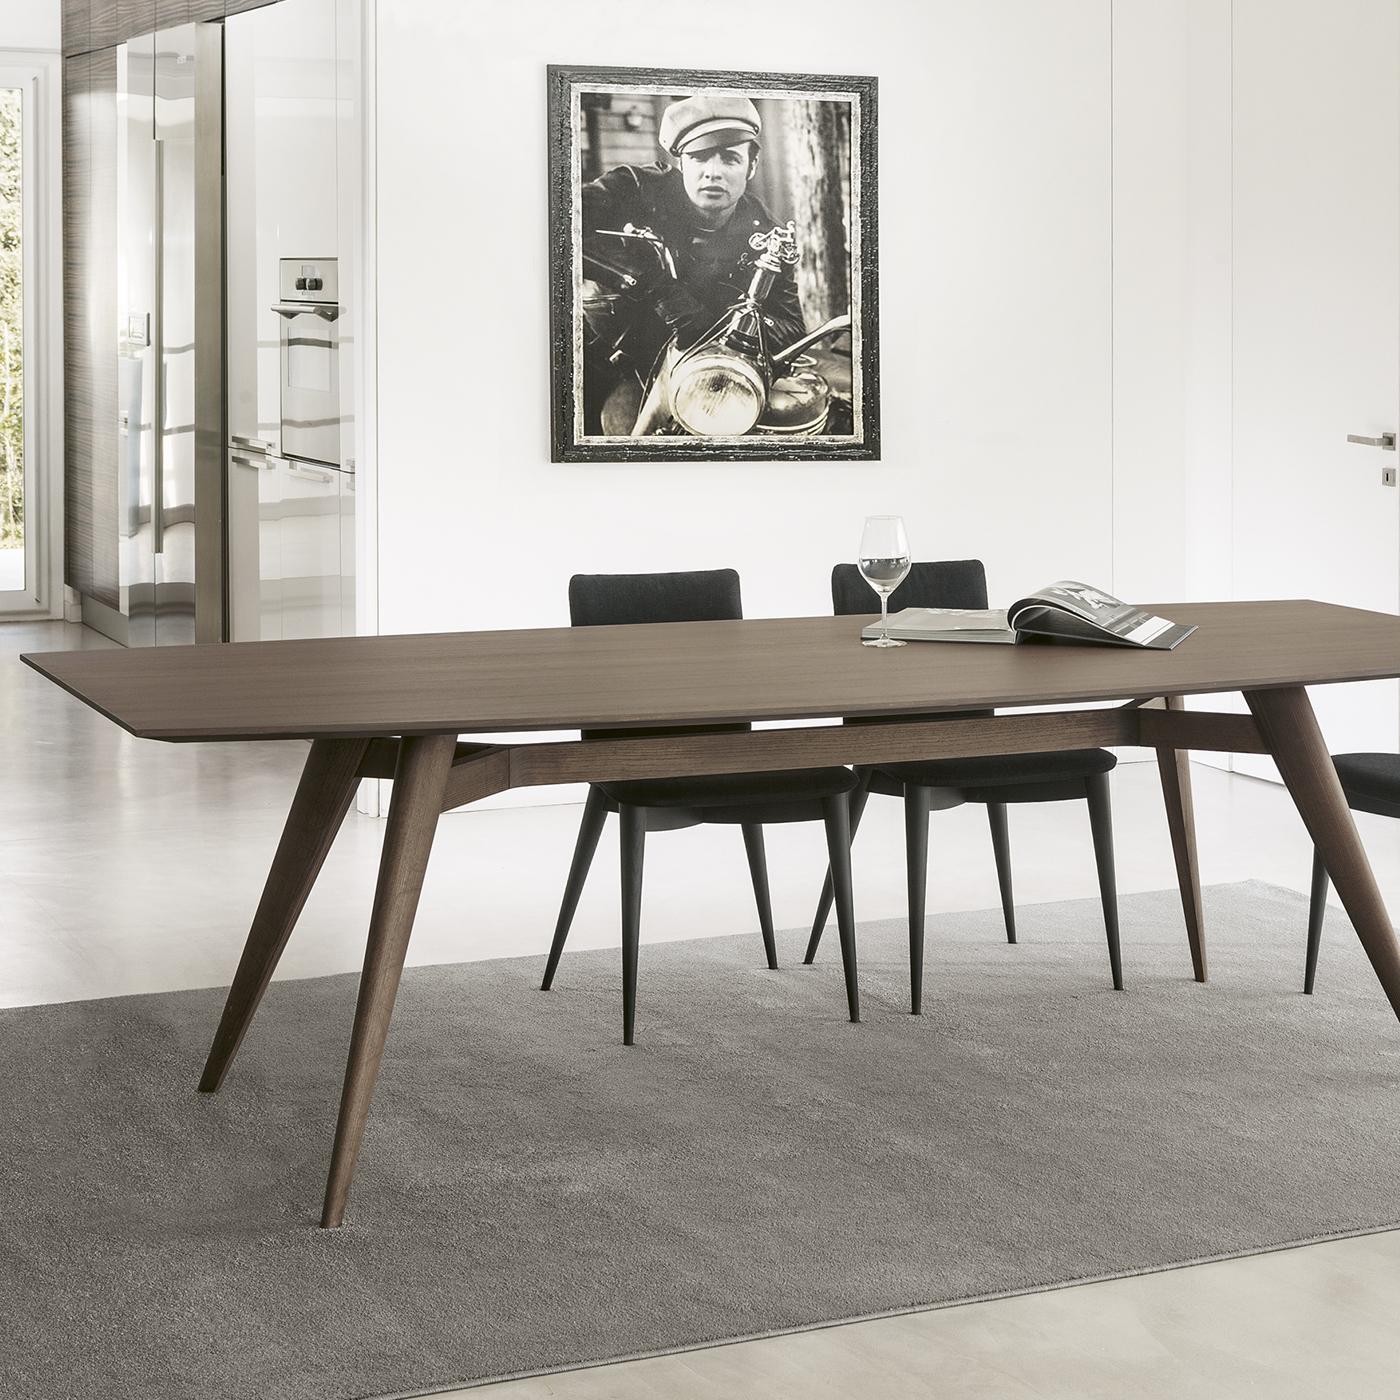 An ode to midcentury clean and charming design, this dining table was designed by architect Fabio Rebosio and is crafted of solid ash. The distinctive slated legs connect just below a wooden top. The finish of the wood can be in natural ash,